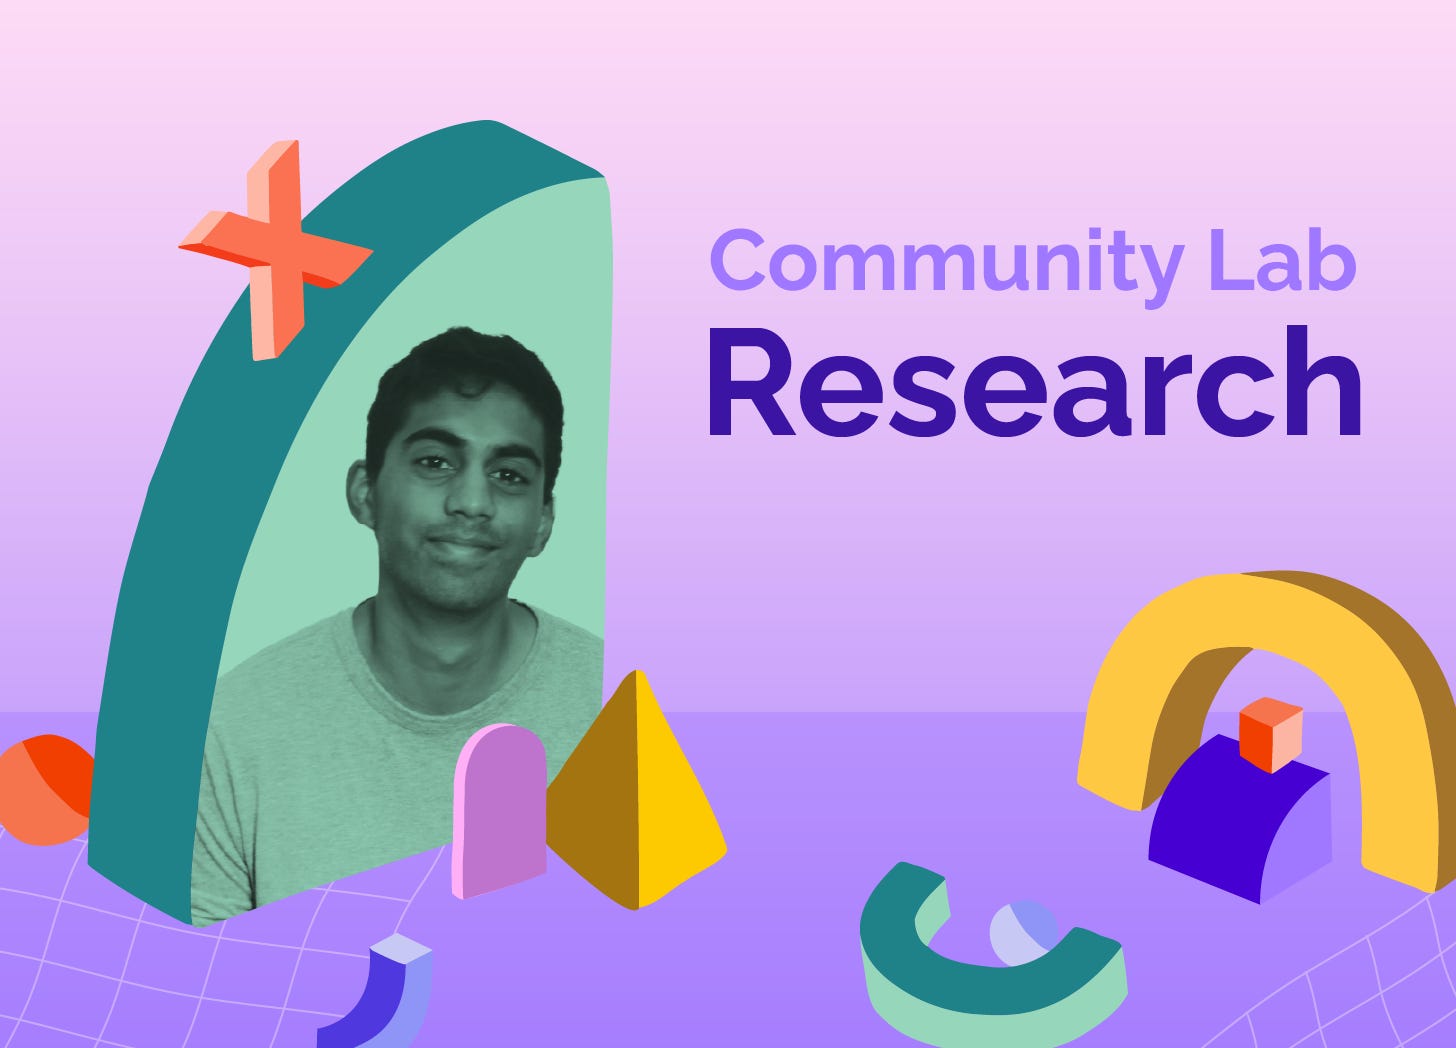 A decorative header image with lots of colorful shapes, a photo of Adit (a youngish Indian American man), and the text "Community Lab" and "Research"